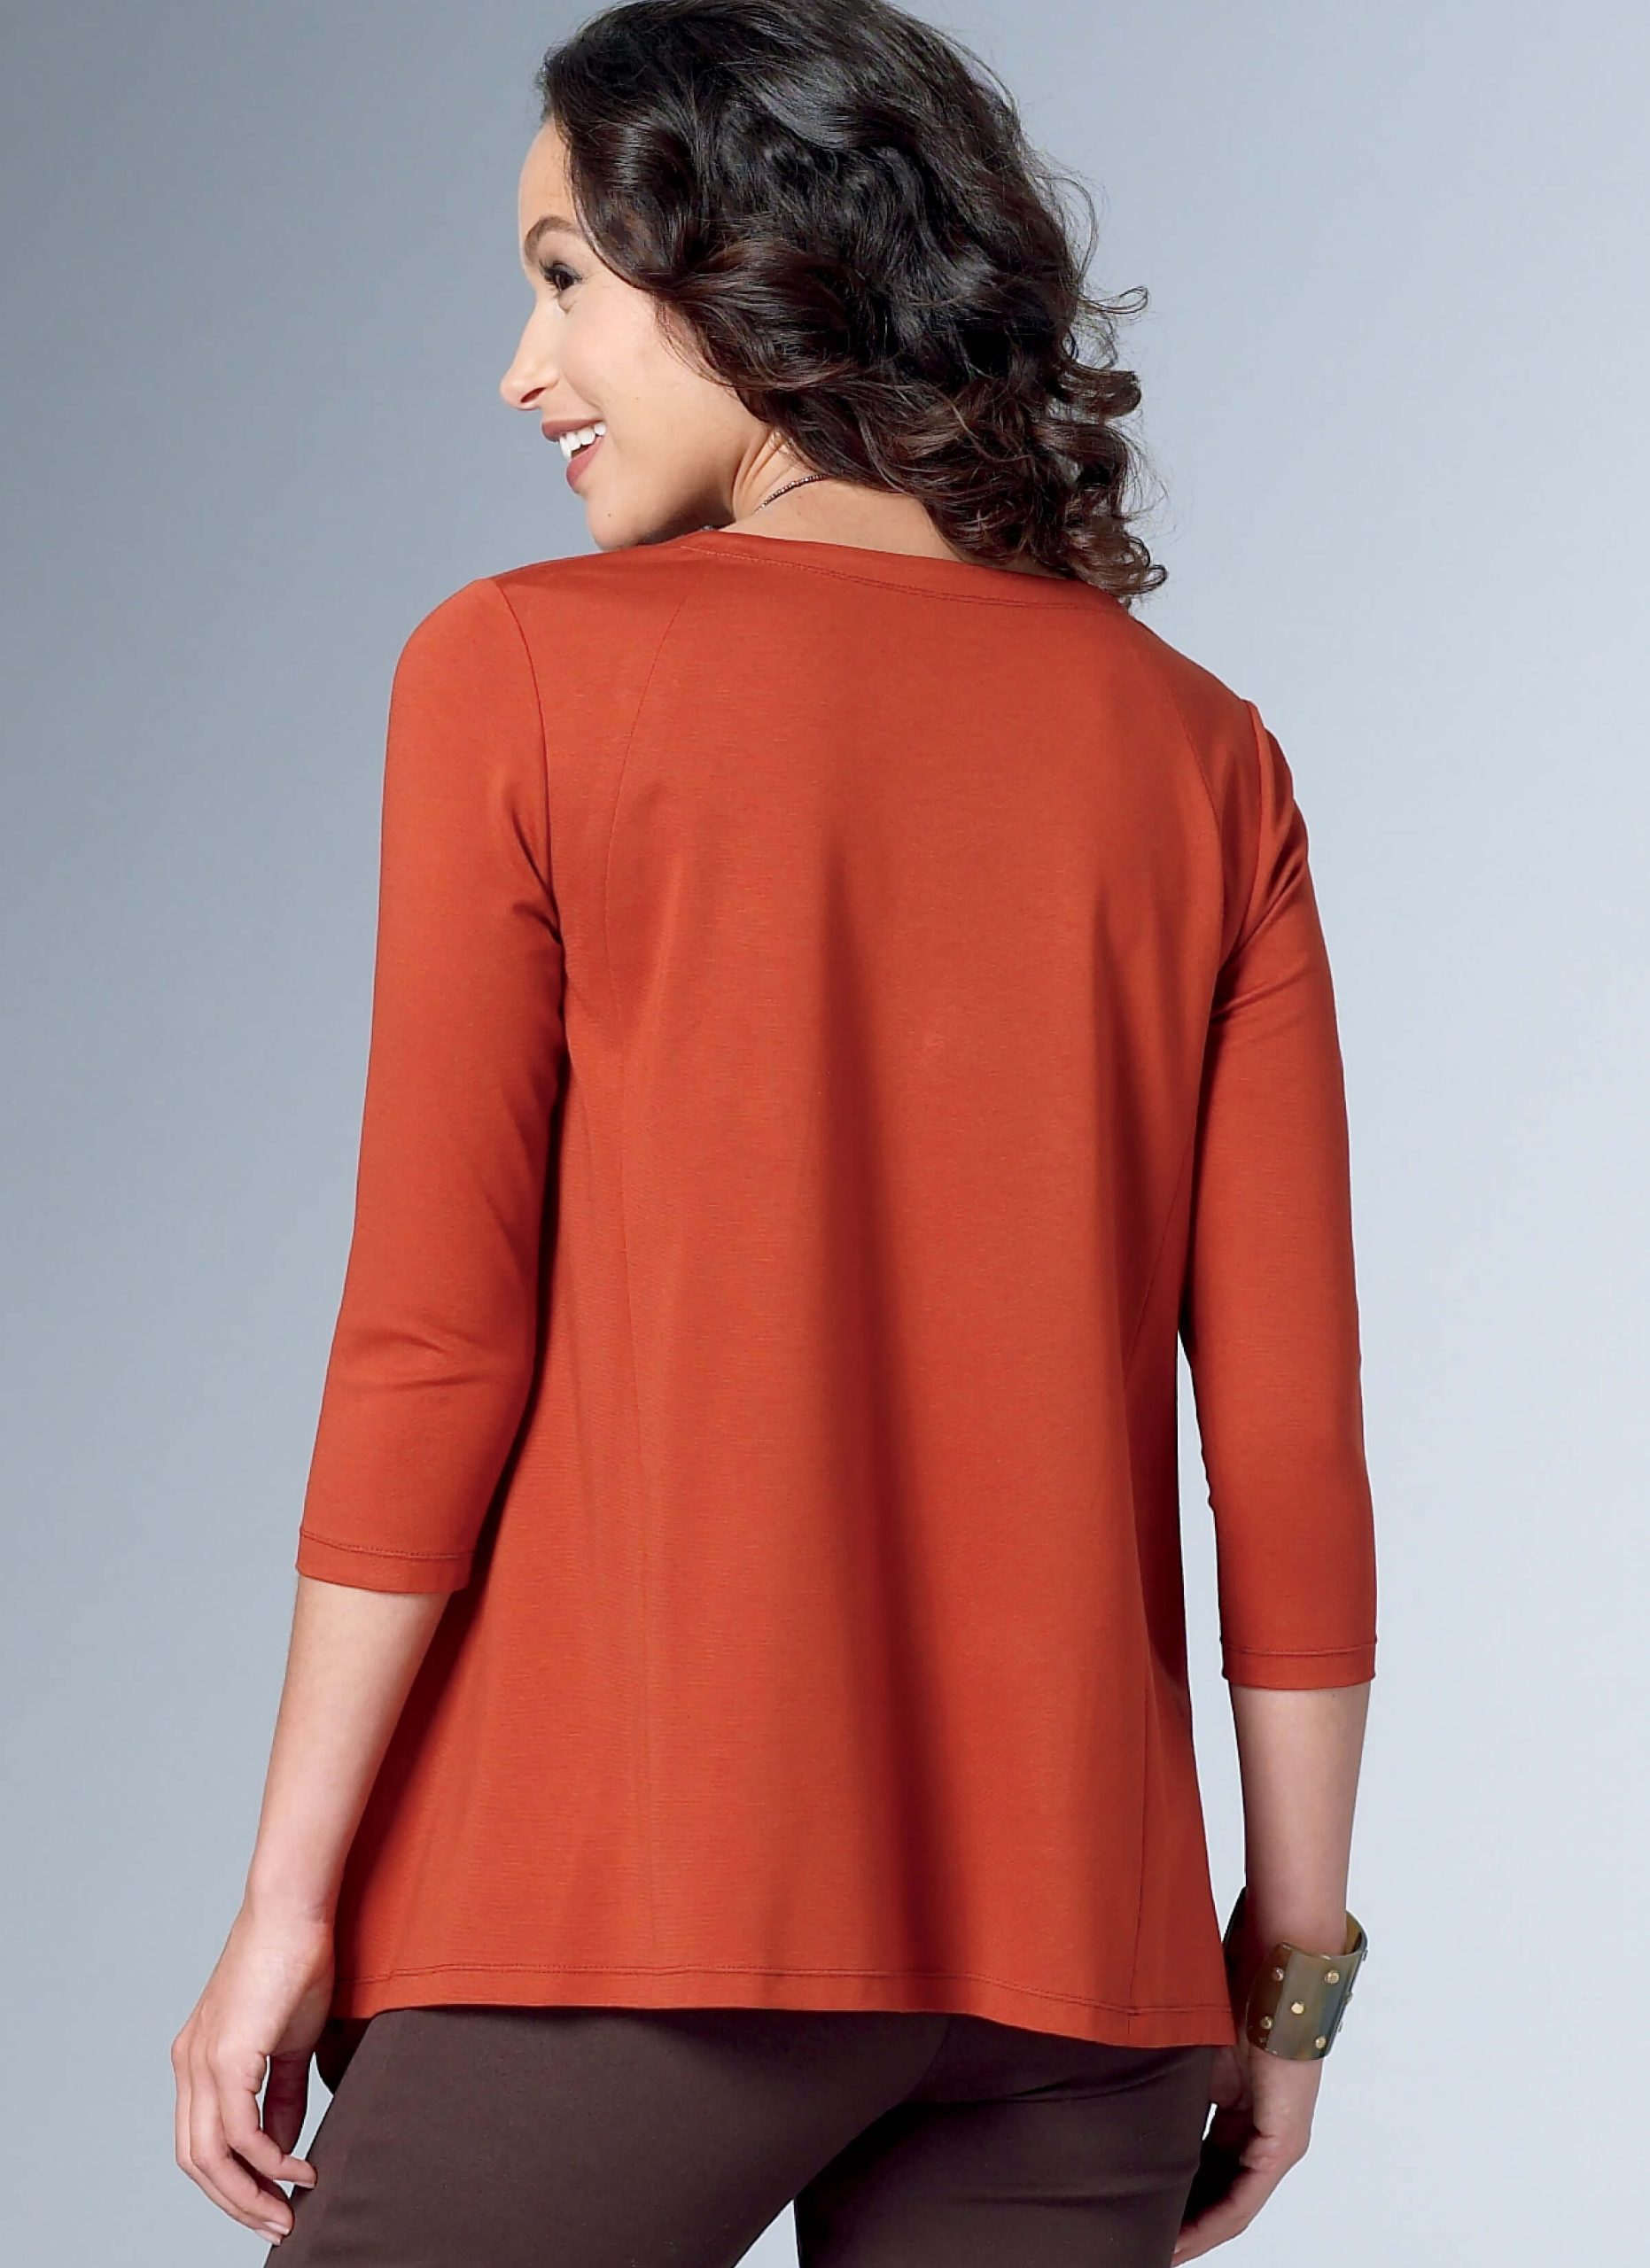 Misses' Loose Knit Tunics with Shaped Sides and Pockets